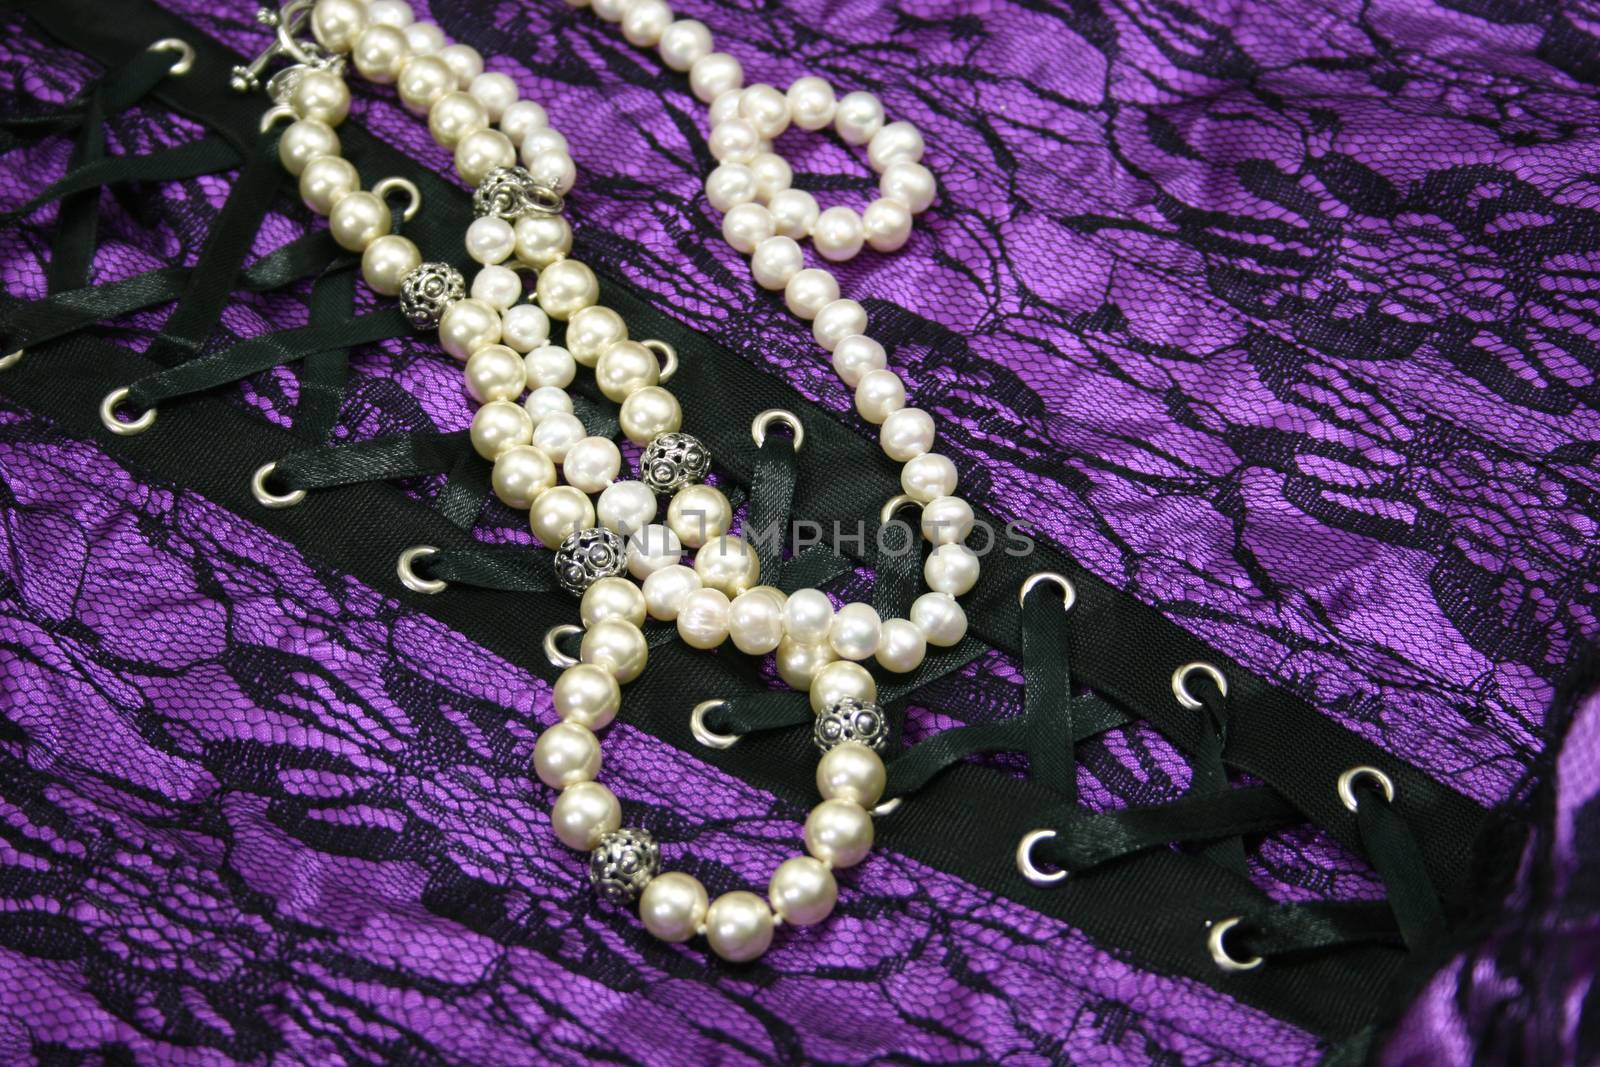 Lingerie and Pearls Background by Marti157900